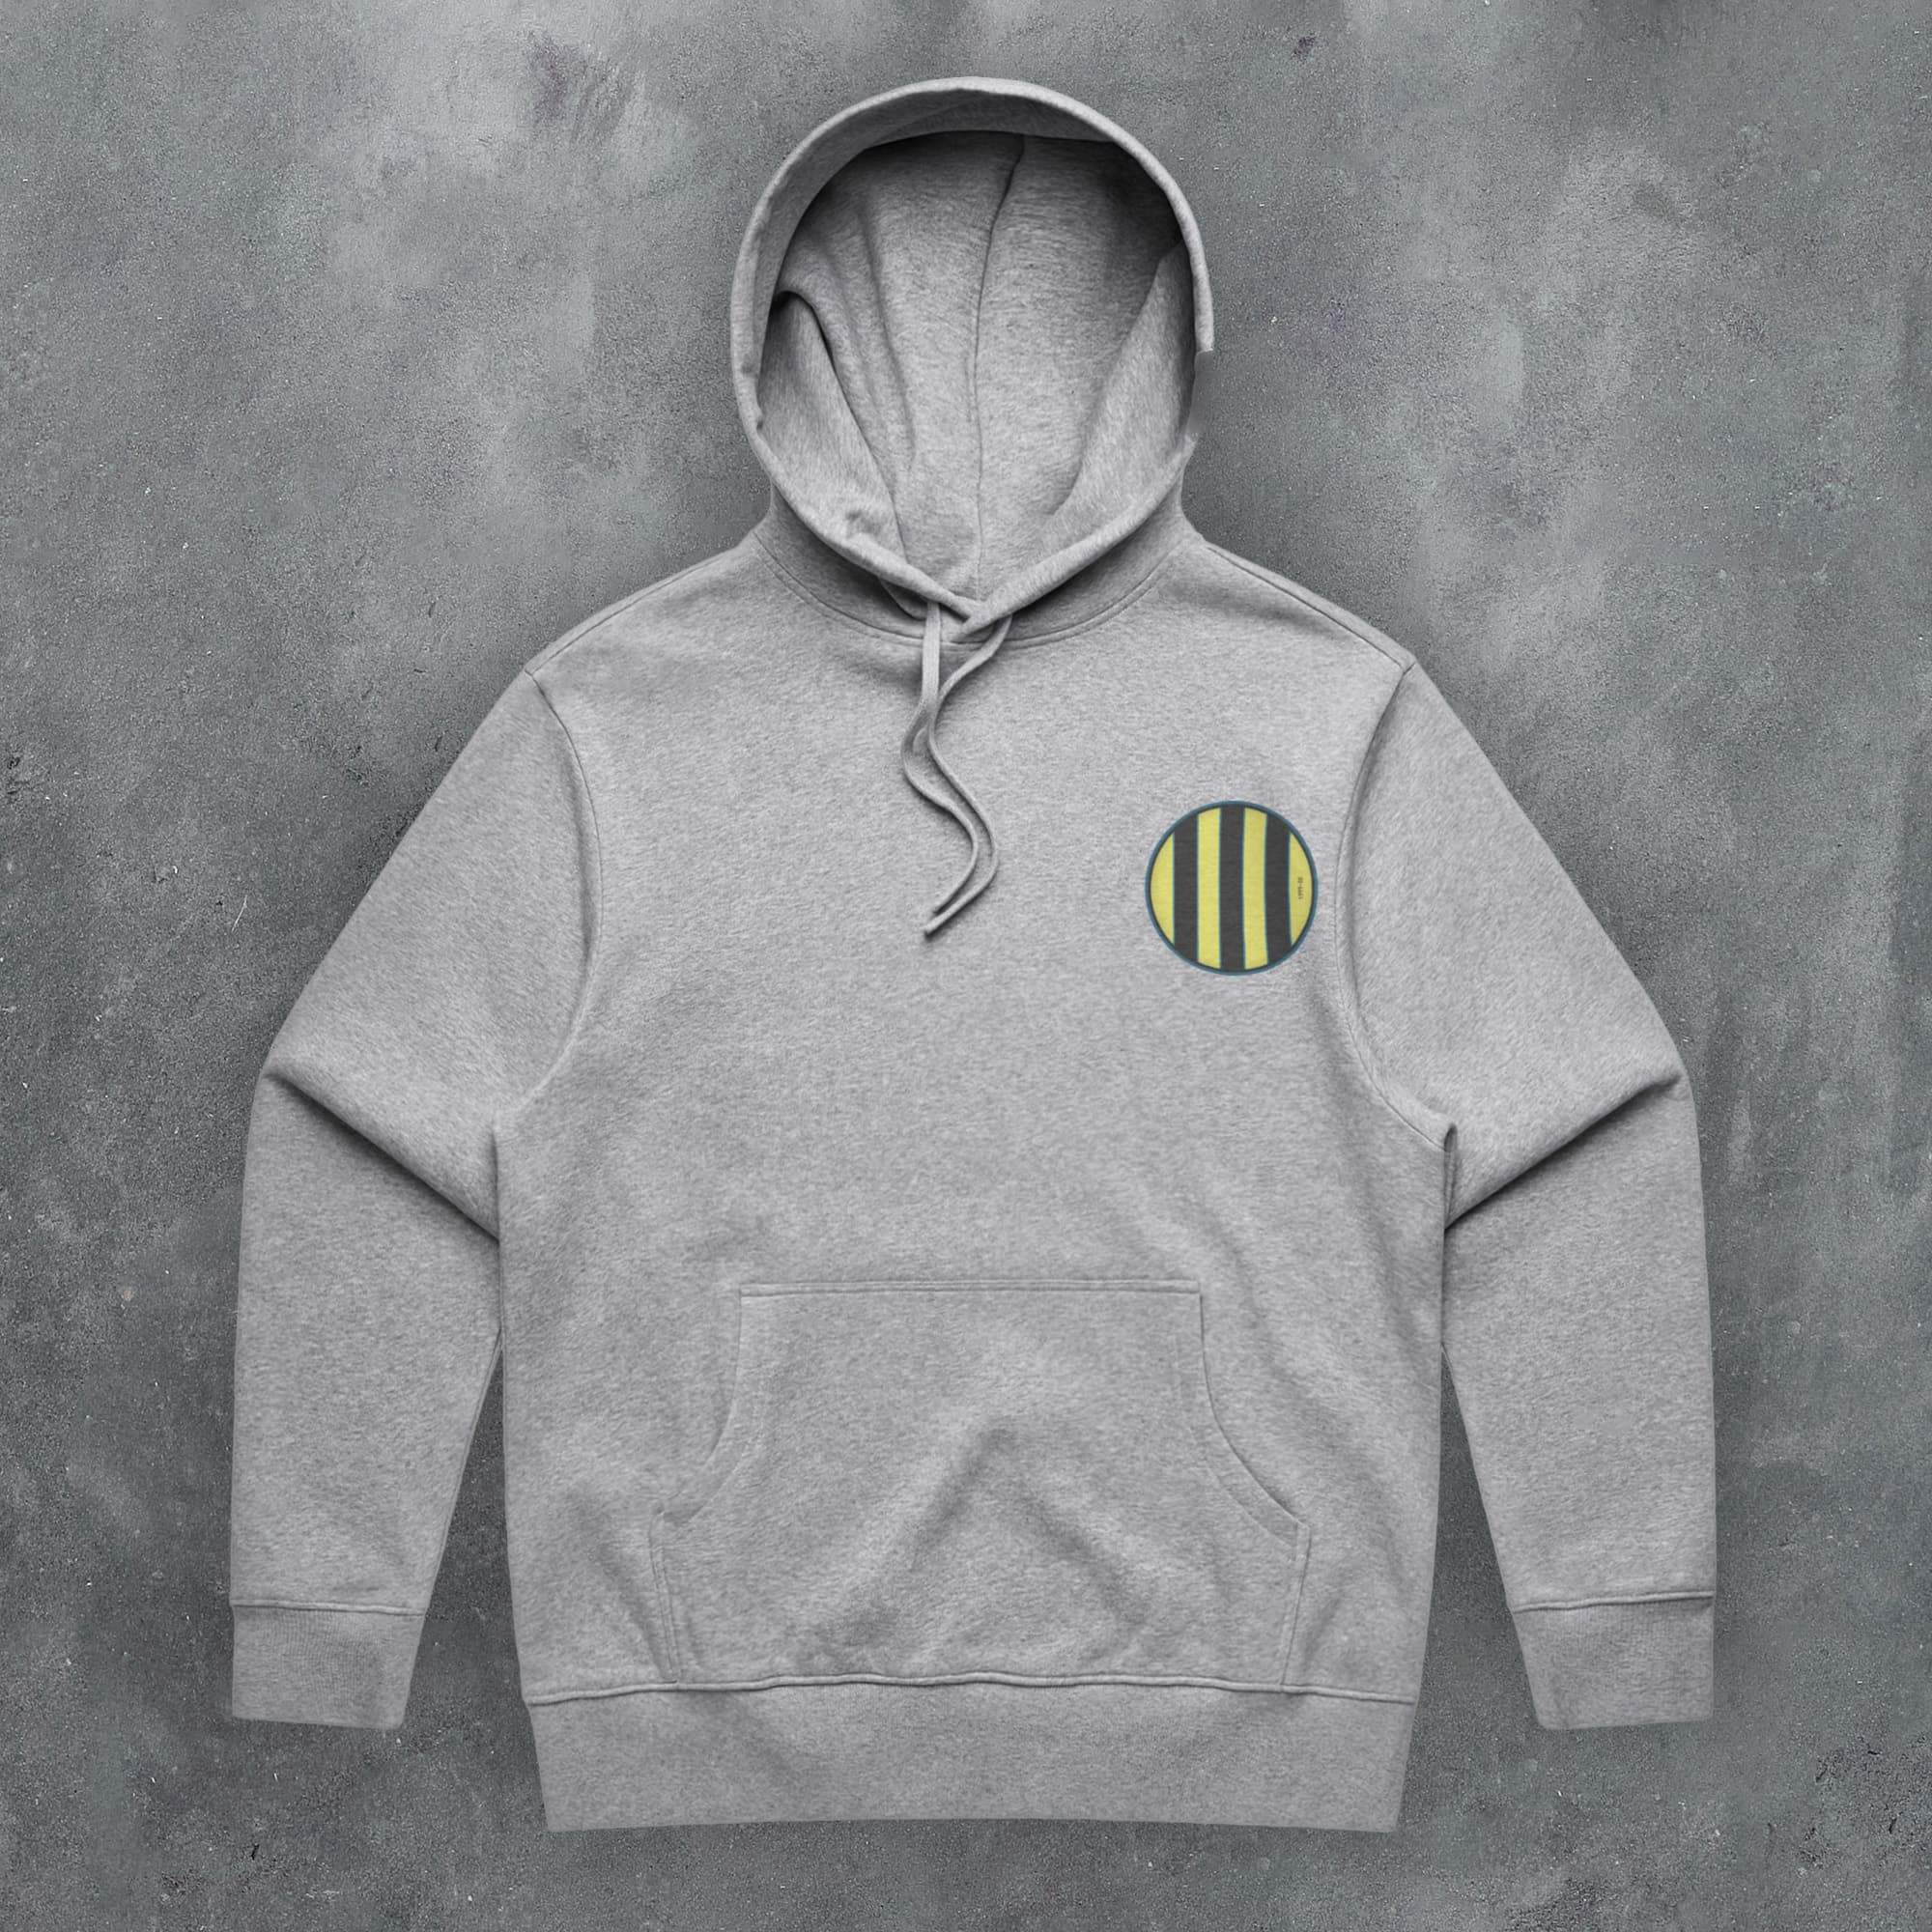 a grey hoodie with a yellow and black stripe on it